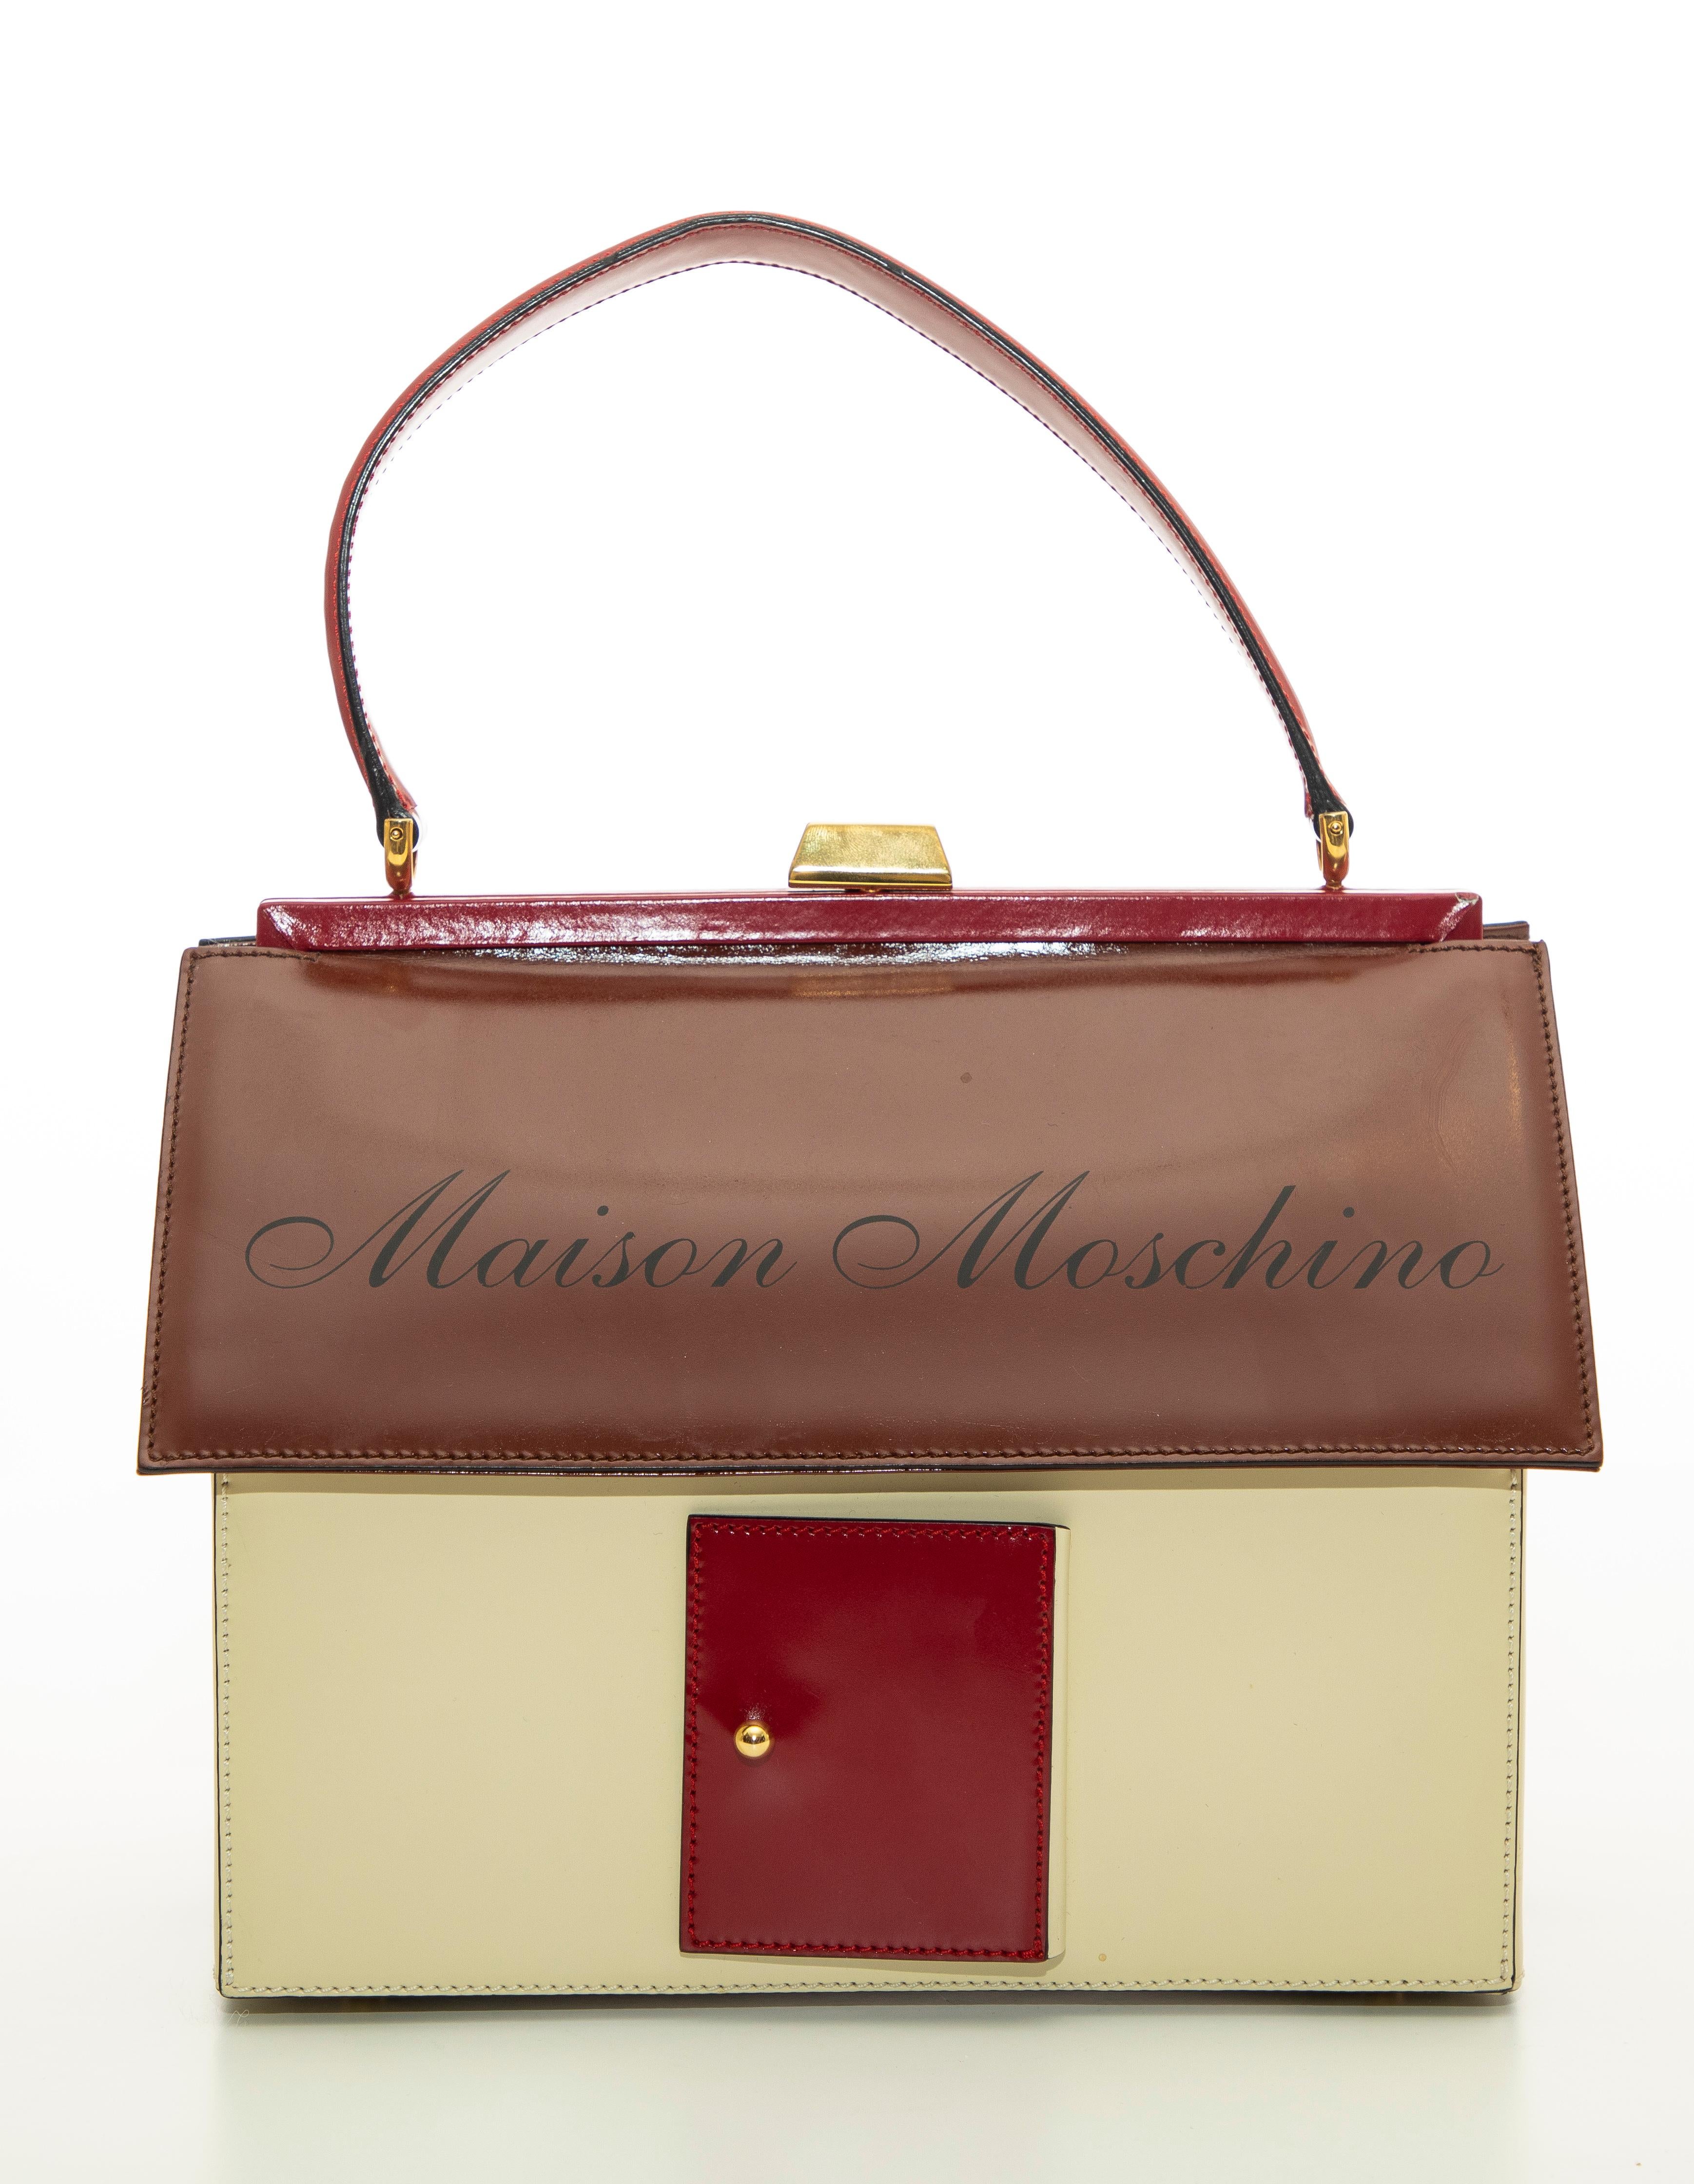   Moschino, Circa: 1991 house shaped top handle leather handbag with front door that opens to conceal a mirror, gilt metal push-lock clasp, protective feet at base and jacquard woven lining.


Handle Drop: 5, Height: 8, Width: 8.5, Depth: 5.25
